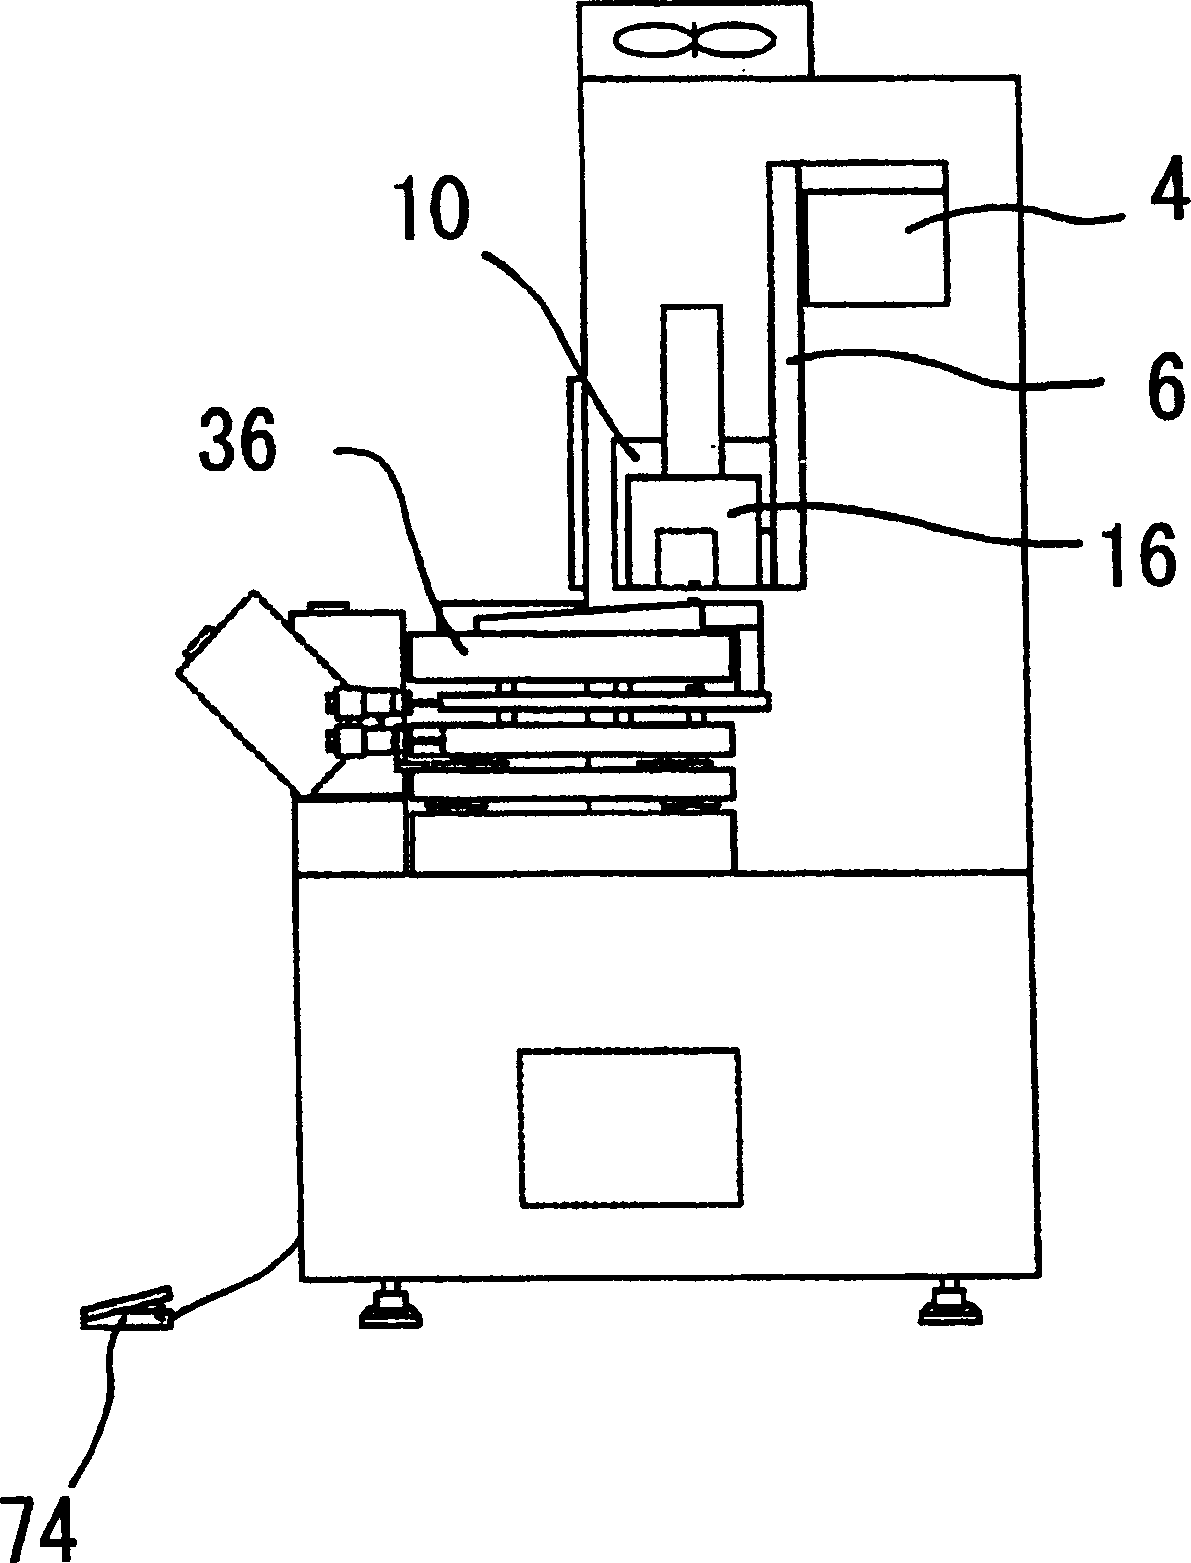 Apparatus and method for drafting